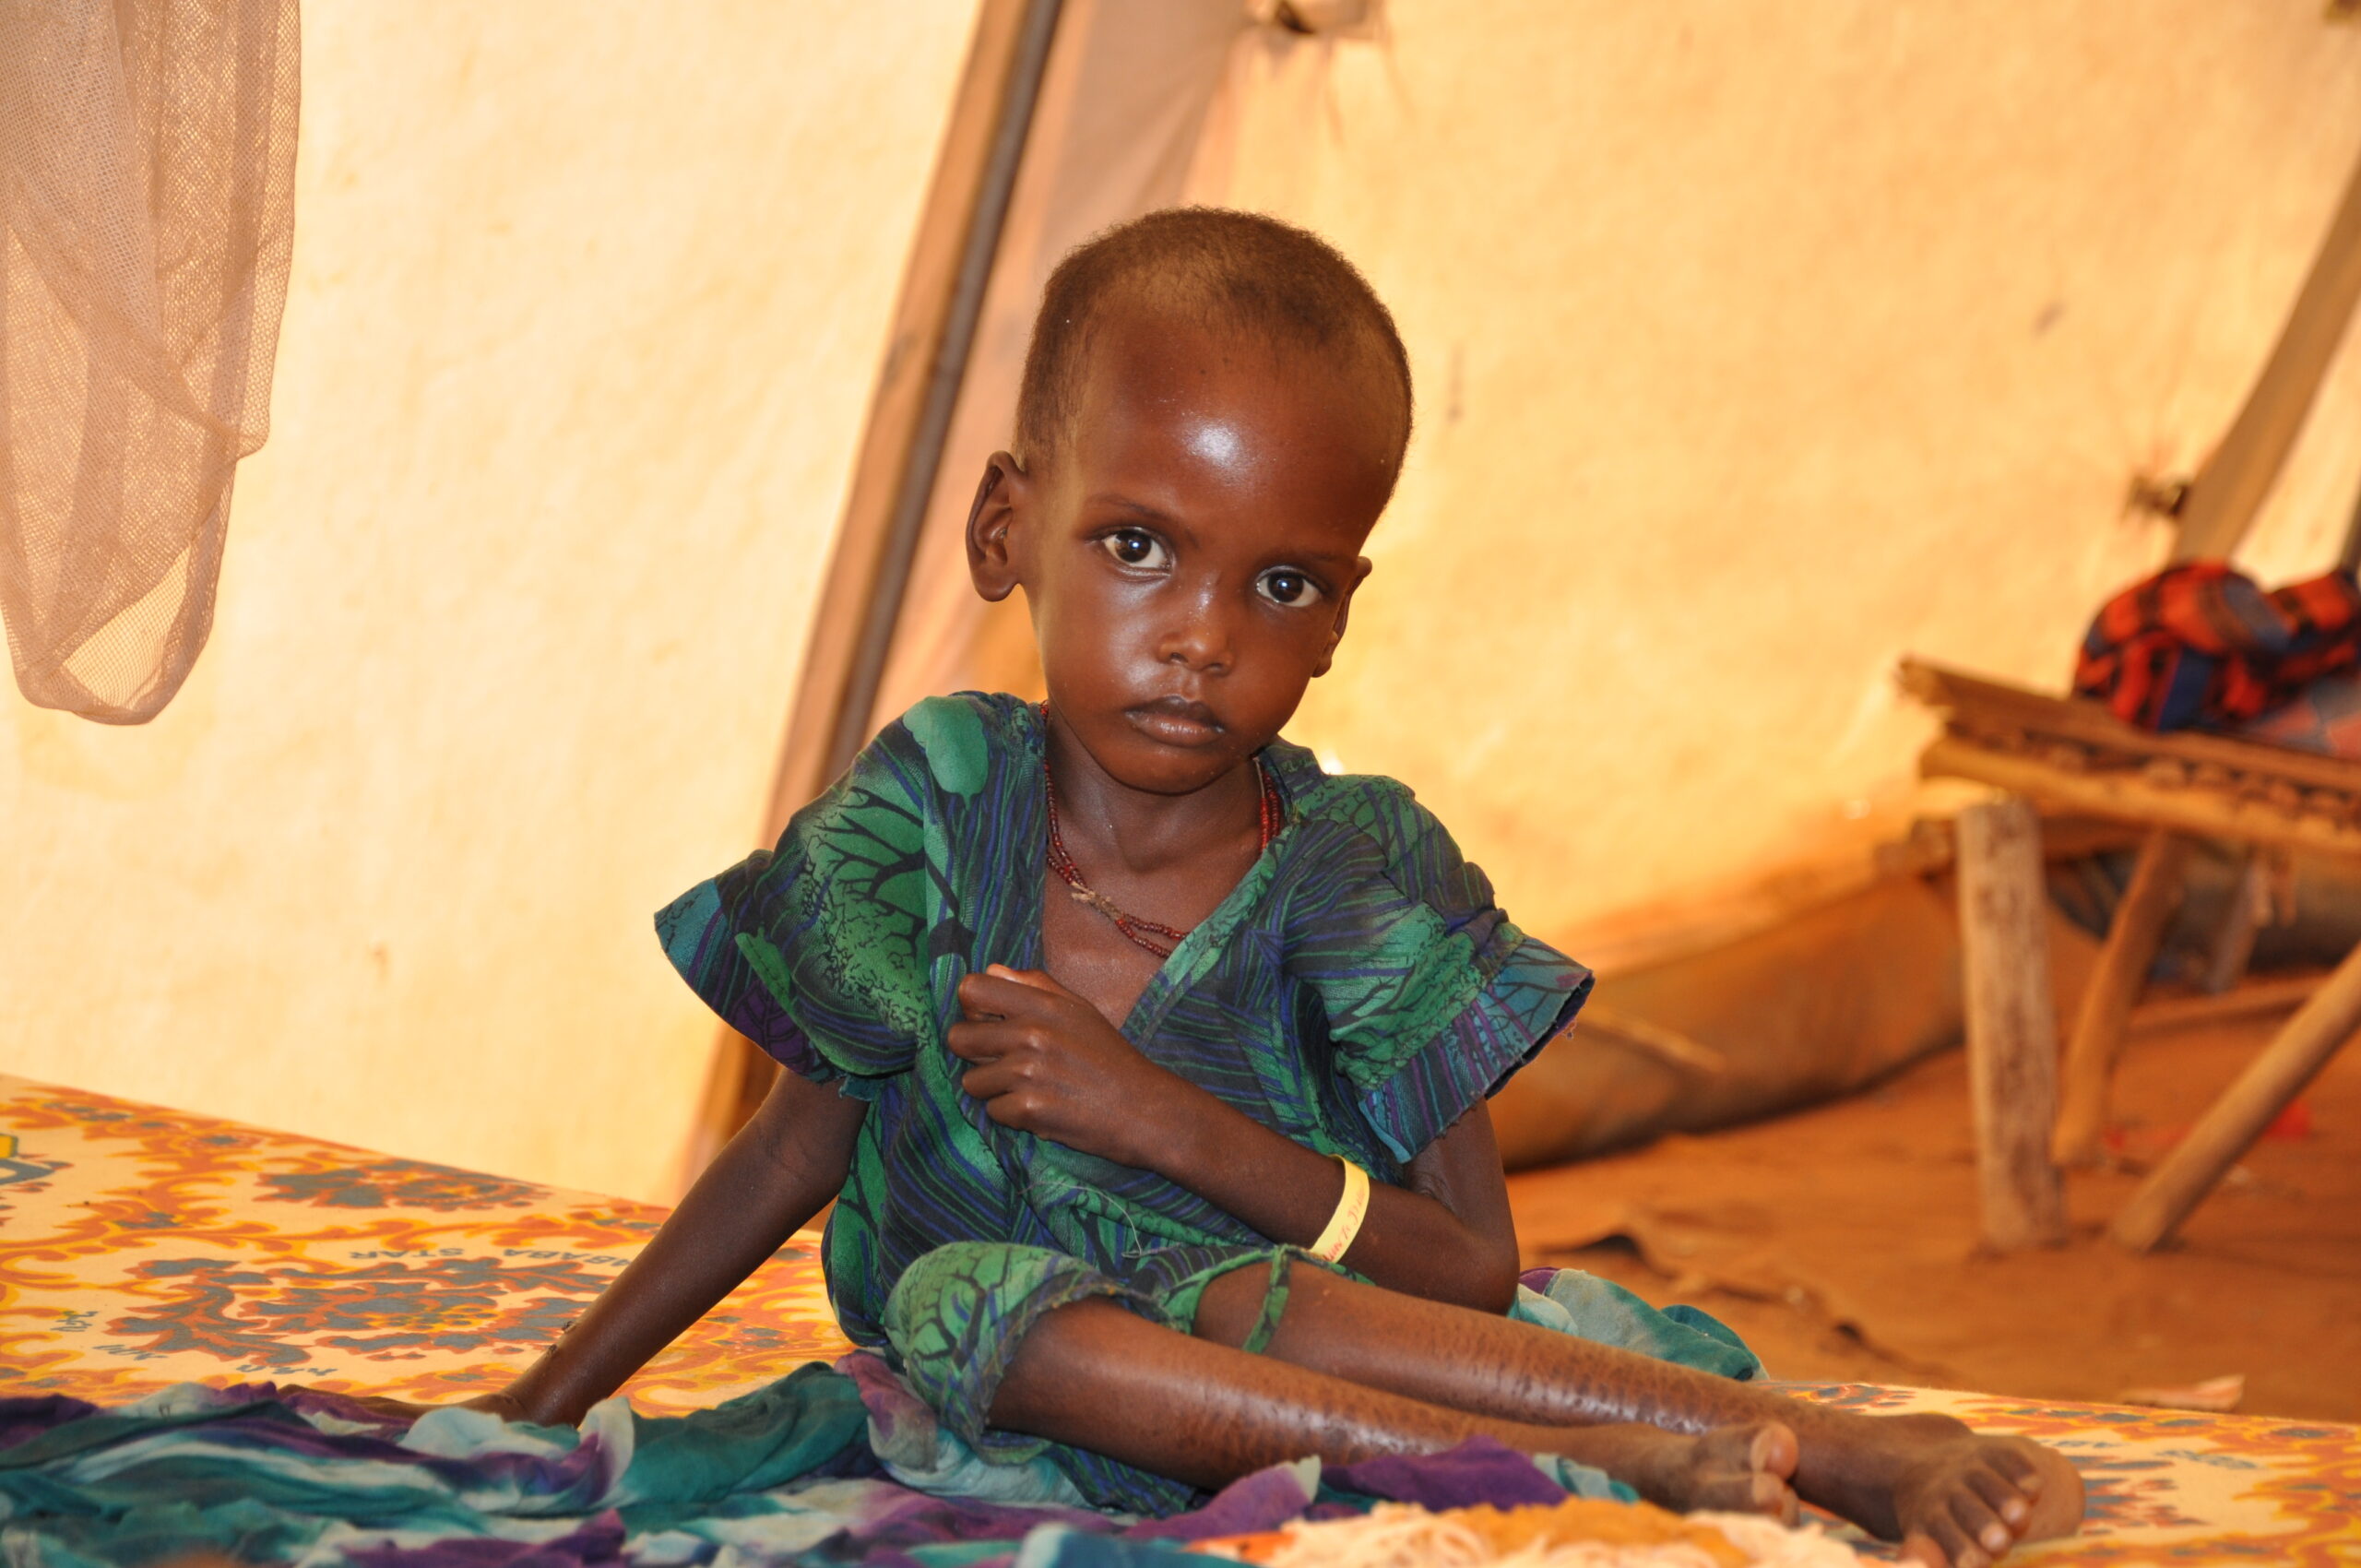 UN appeal for funds to save 30 million malnourished children